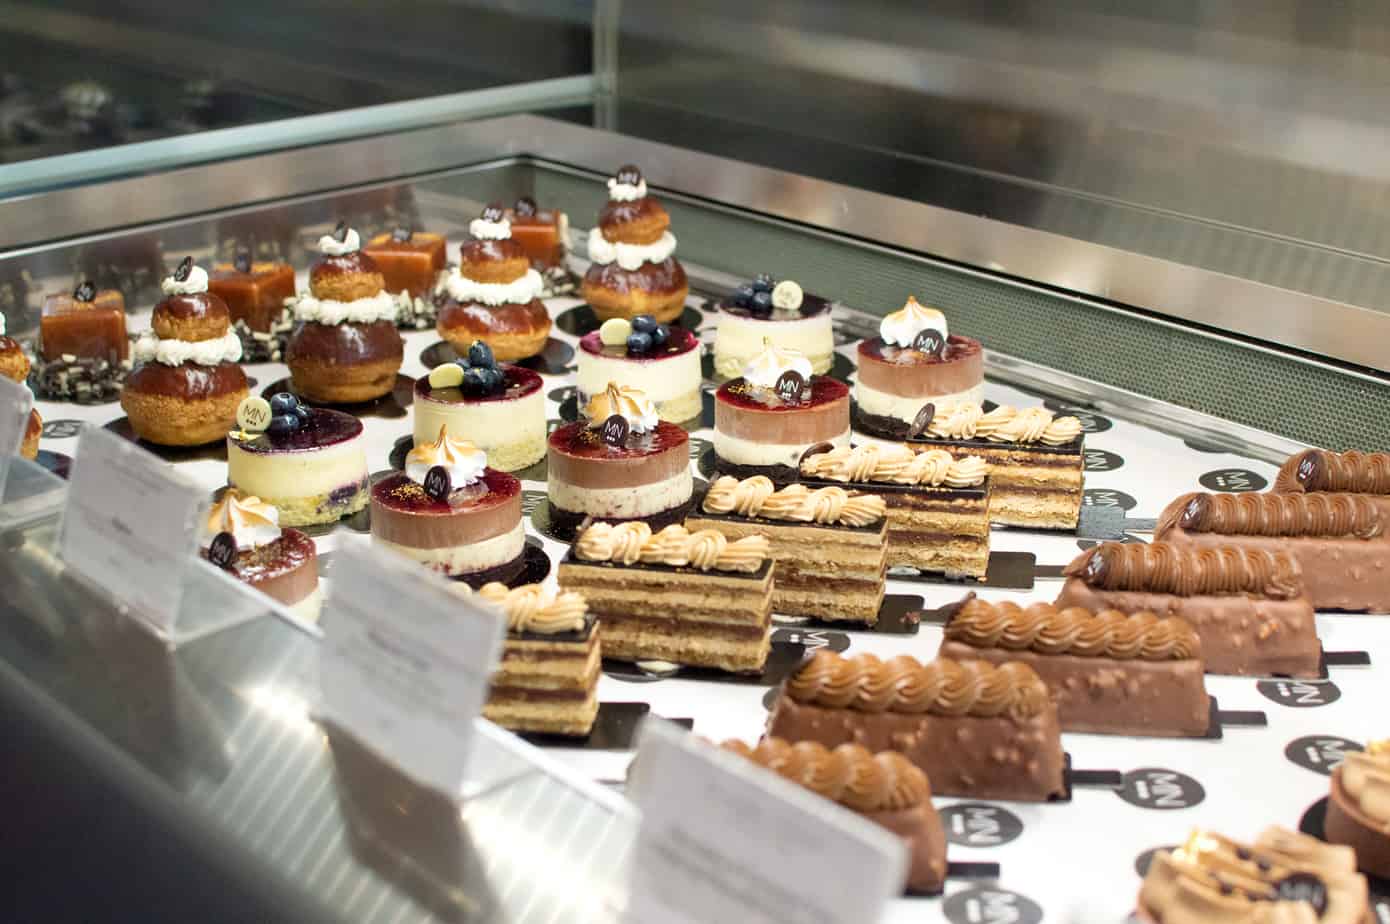 Rows of desserts in a display case